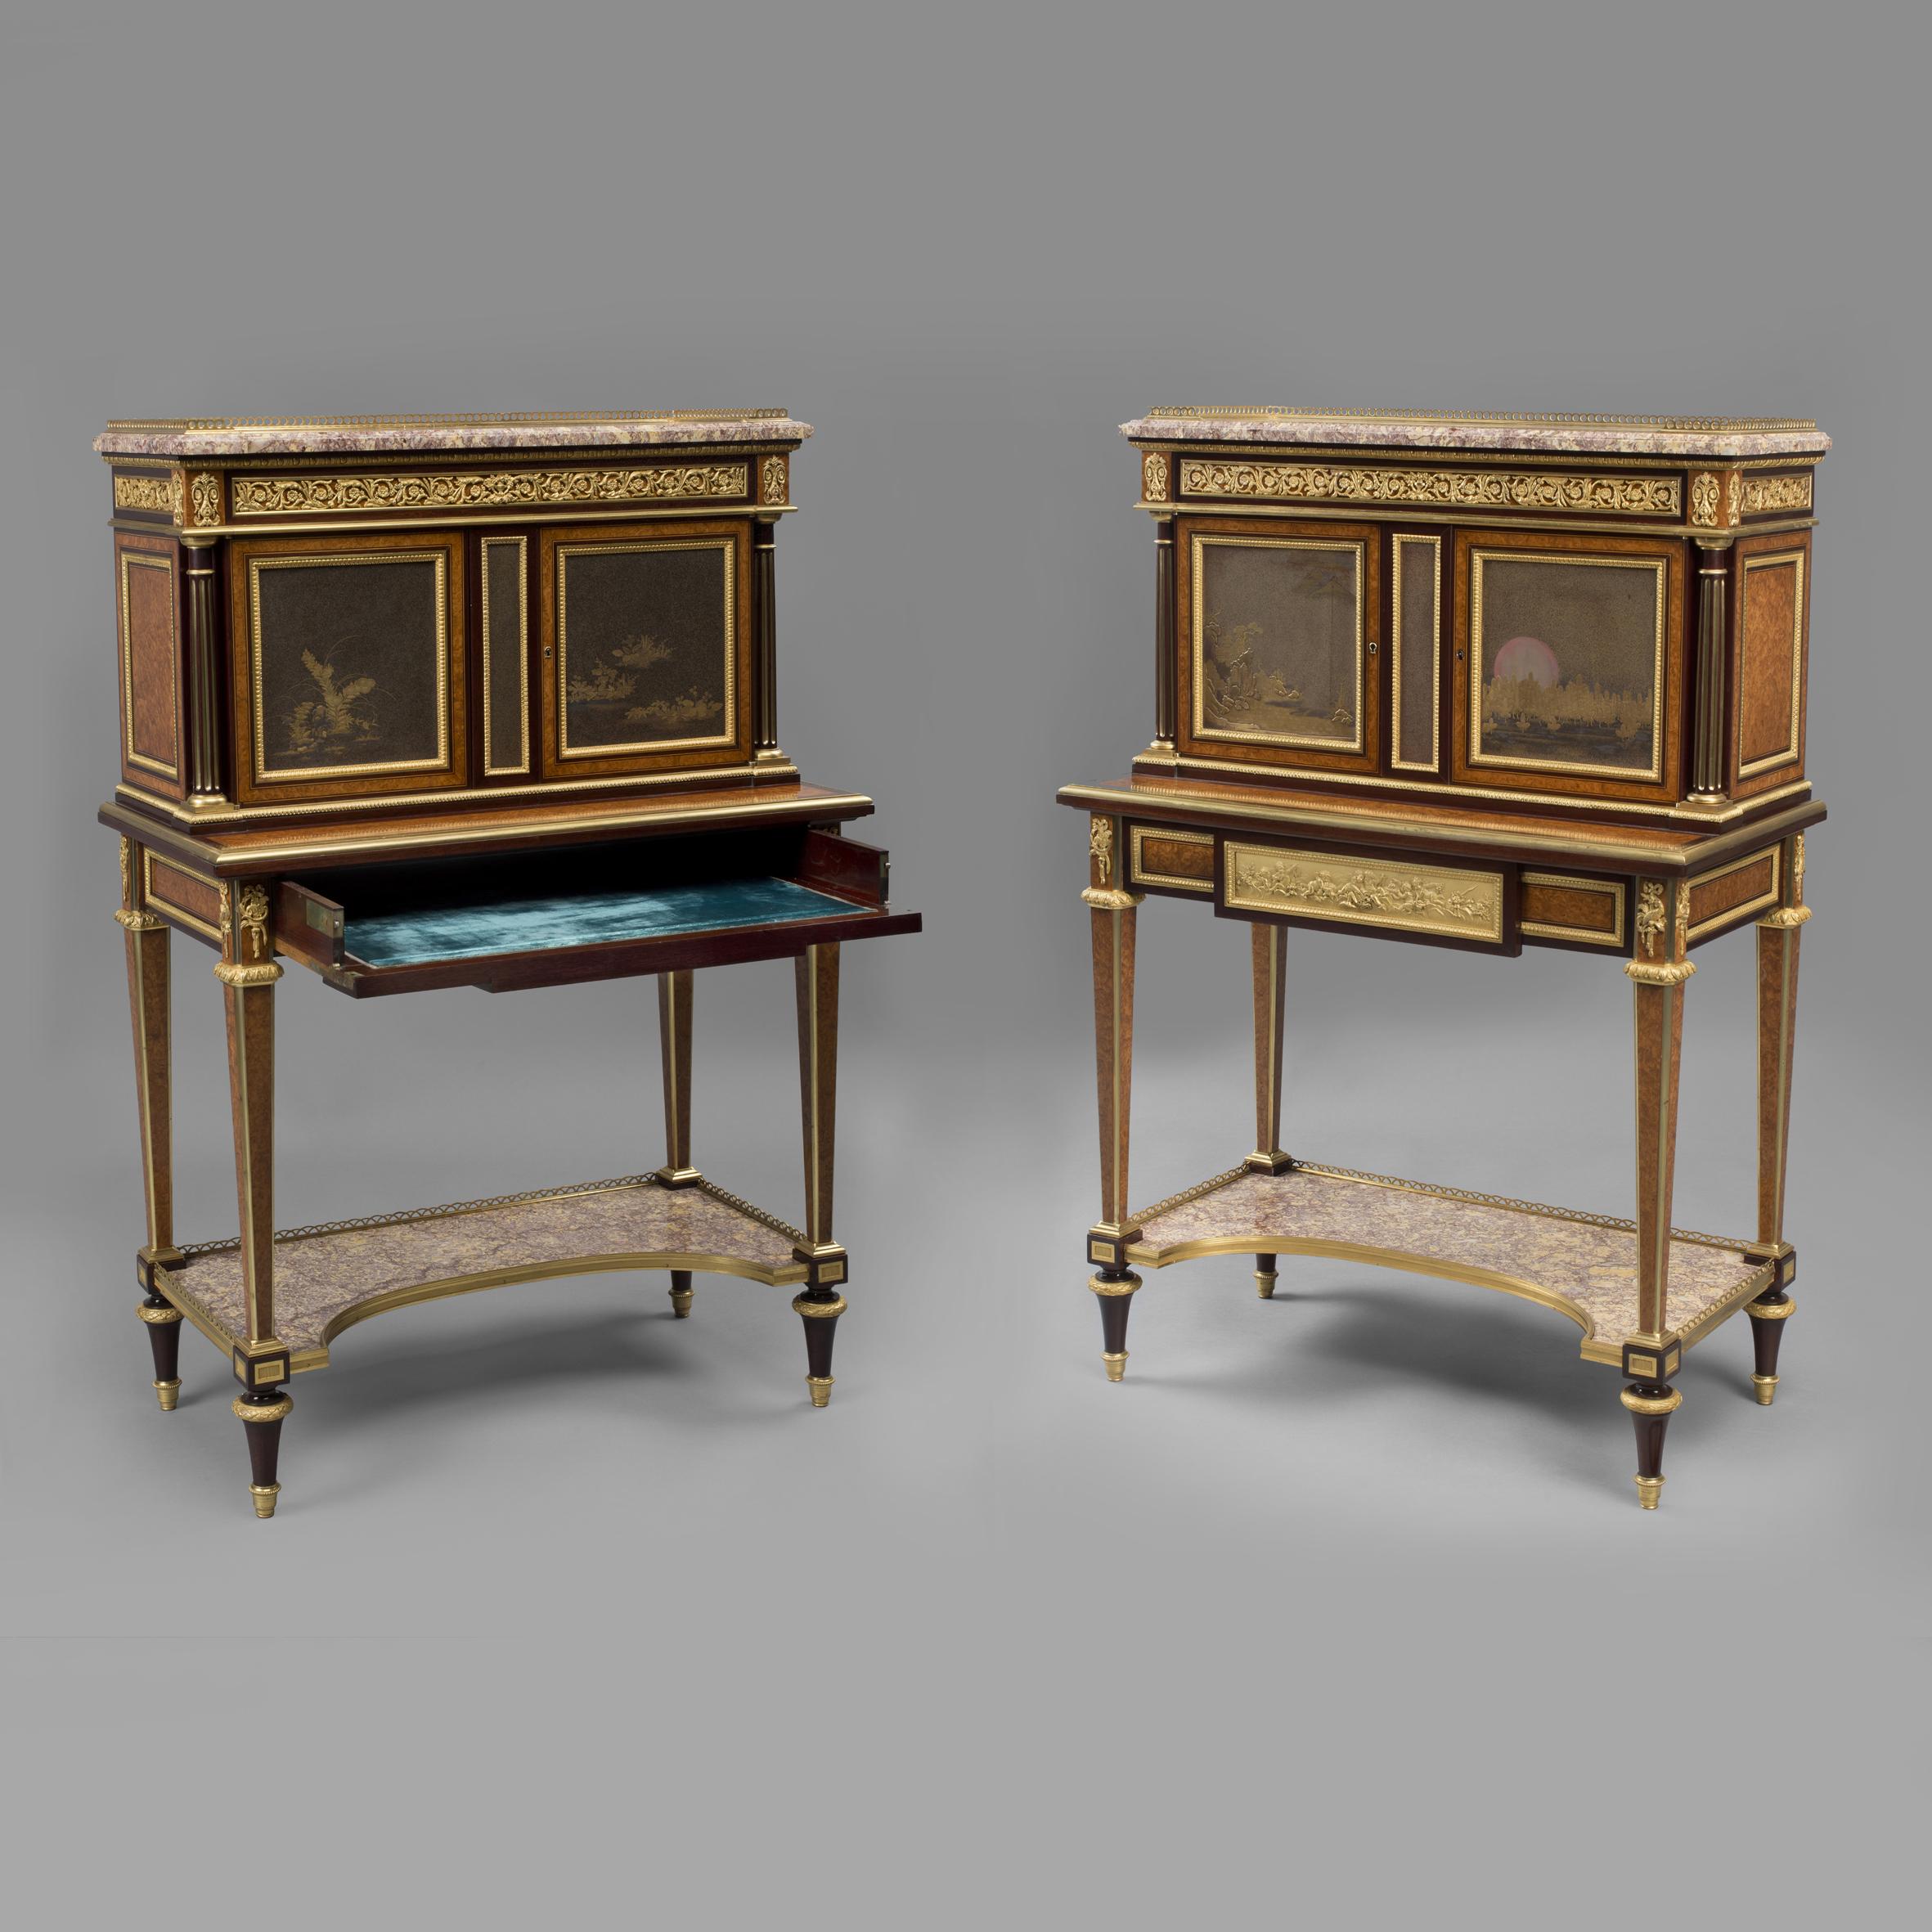 A Very Rare Pair of  Louis XVI Style Exhibition Gilt-Bronze Mounted Bonheur Du Jours With Lacquer Panels, by Henry Dasson. 

One cabinet signed 'Henry Dasson / 1880' to the gilt-bronze border. The carcass stamped twice 'HENRY DASSON/1880'.

These